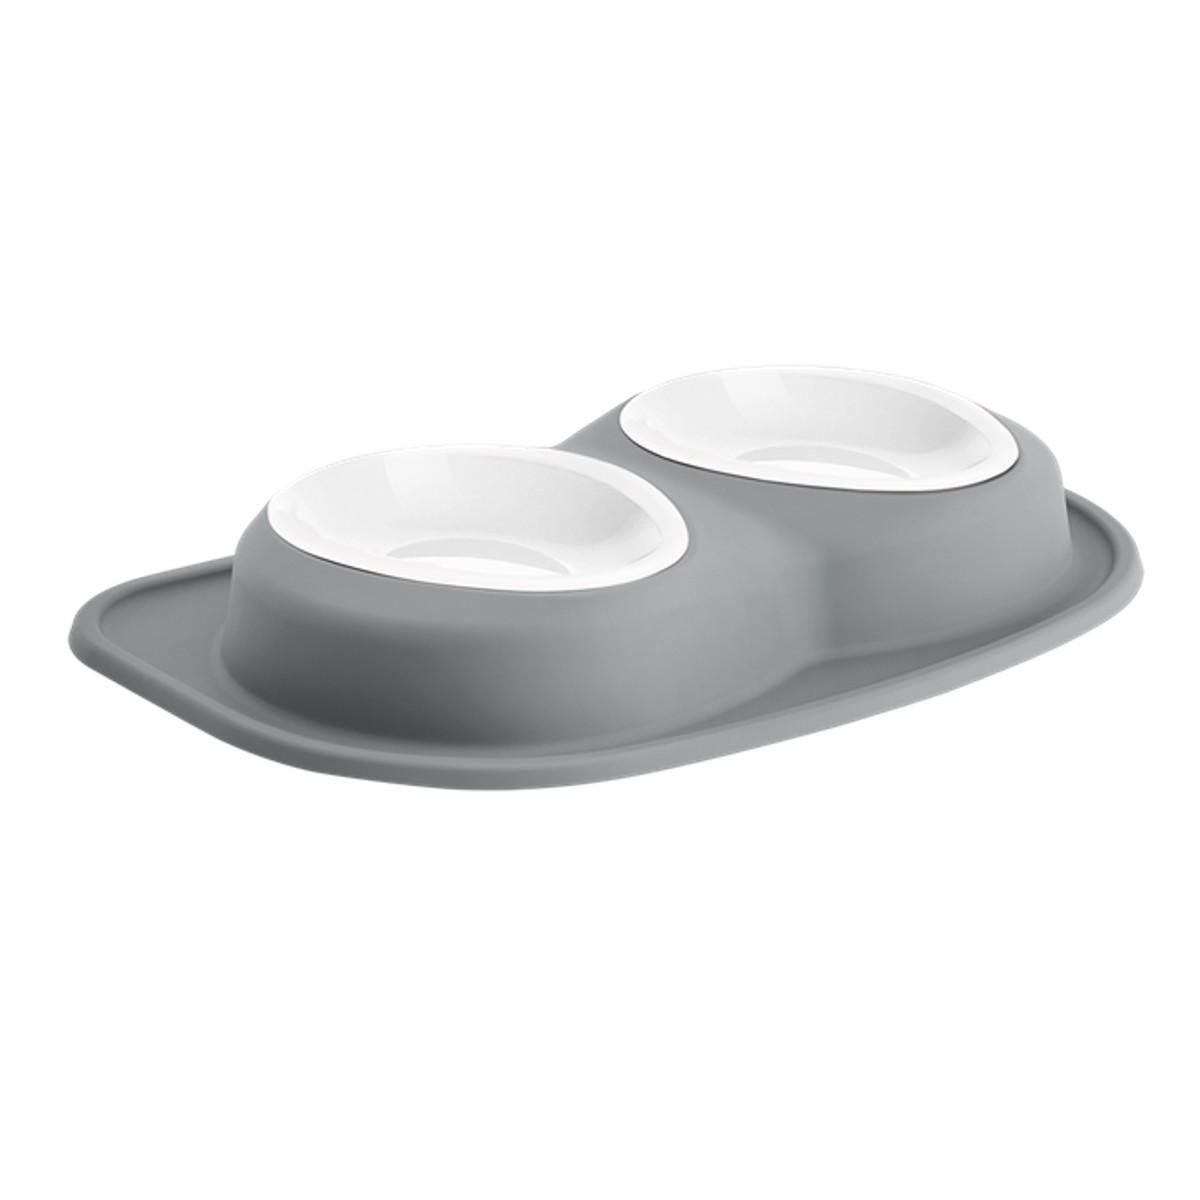 WeatherTech Low Double Diner with White Poly Dog Bowls - Dark Gray